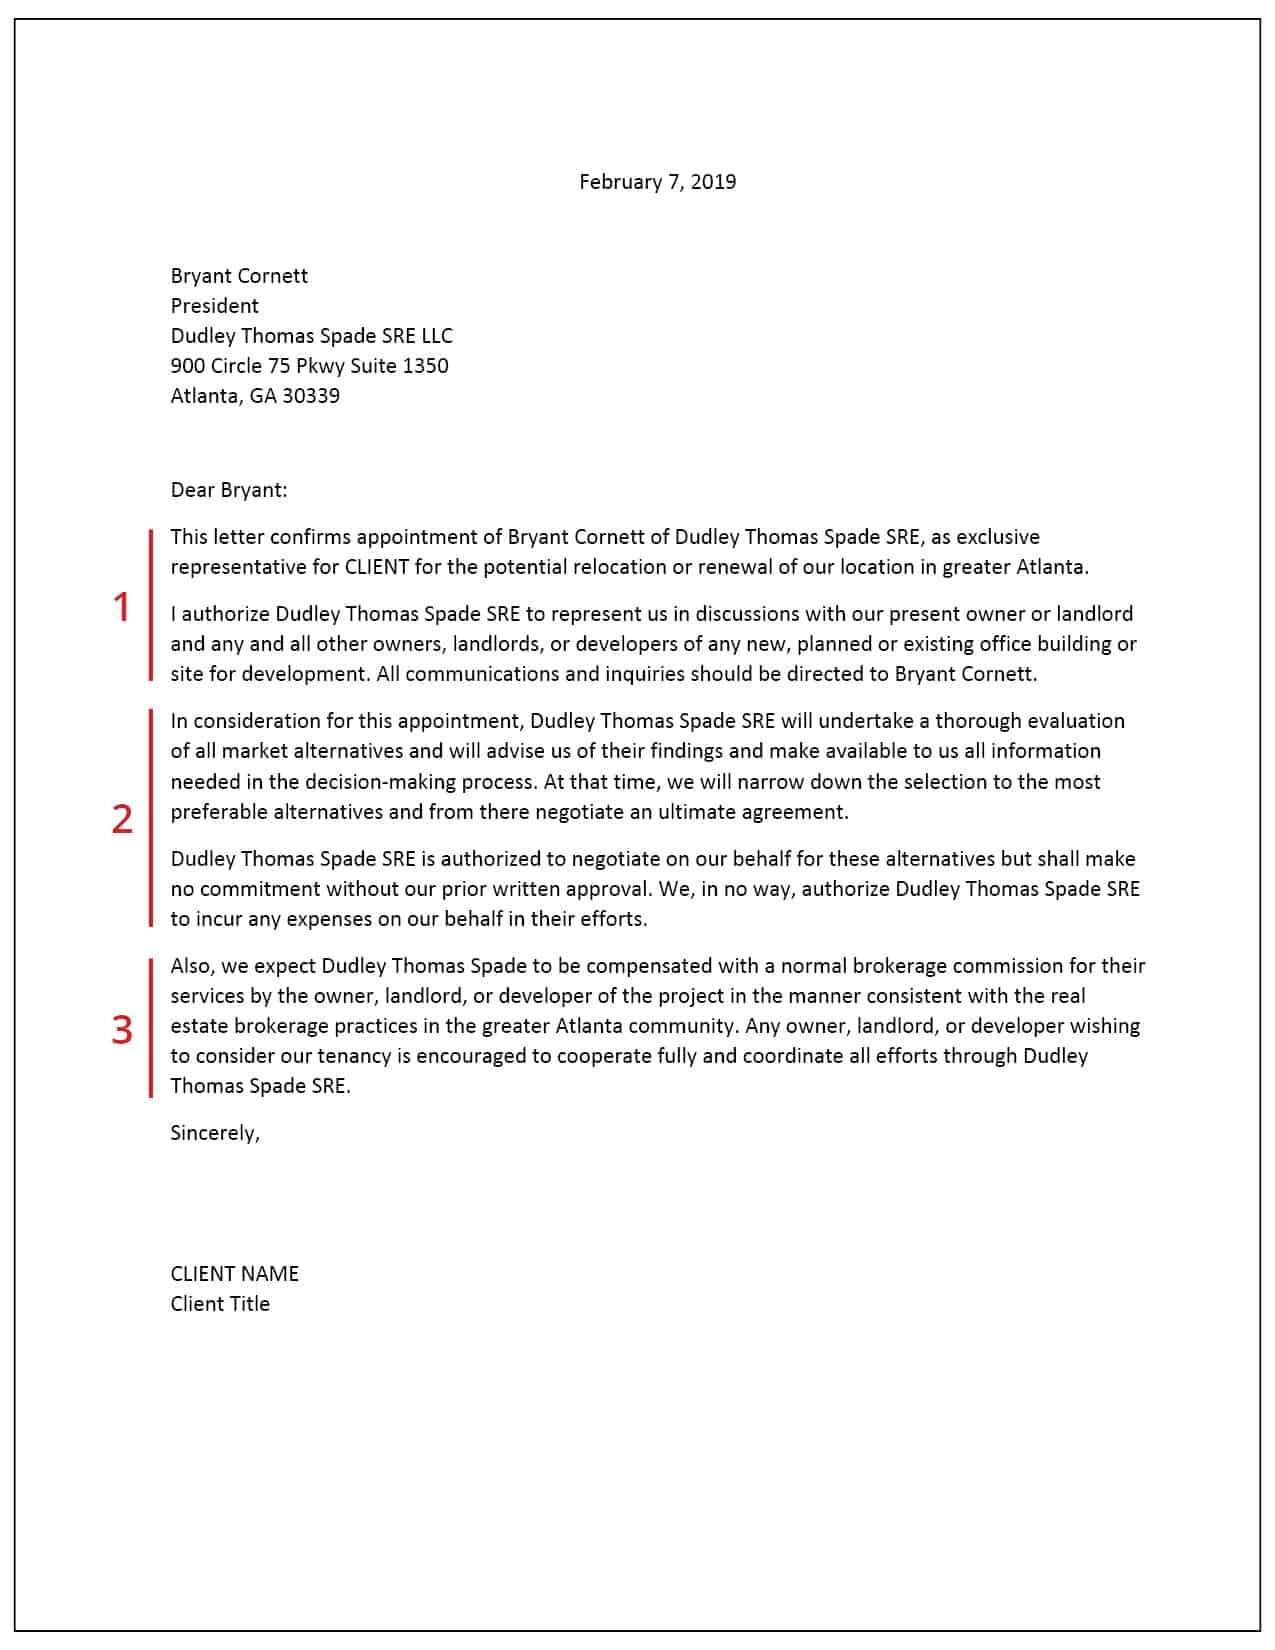 Example Commercial Real Estate Engagement Letter